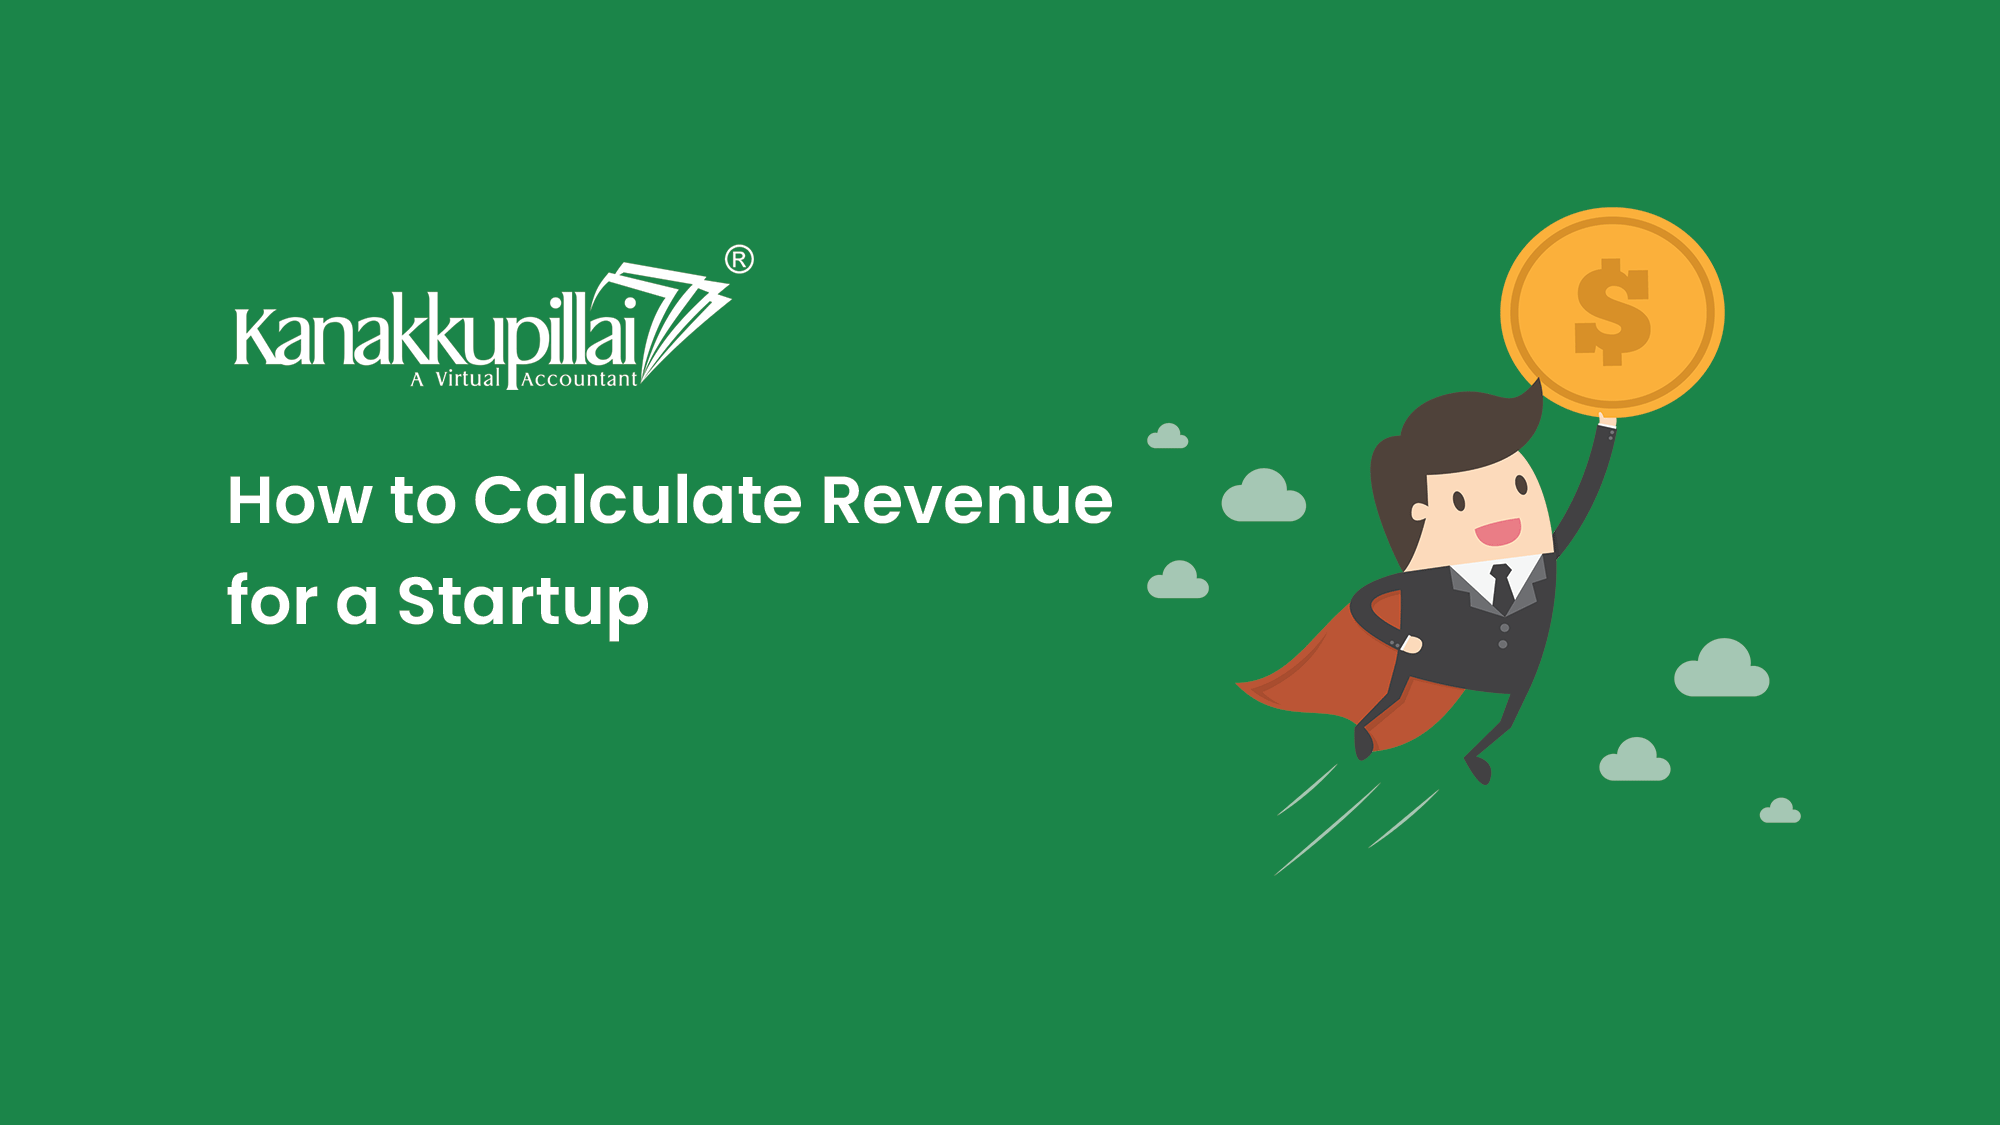 How to Calculate Revenue for a Startup